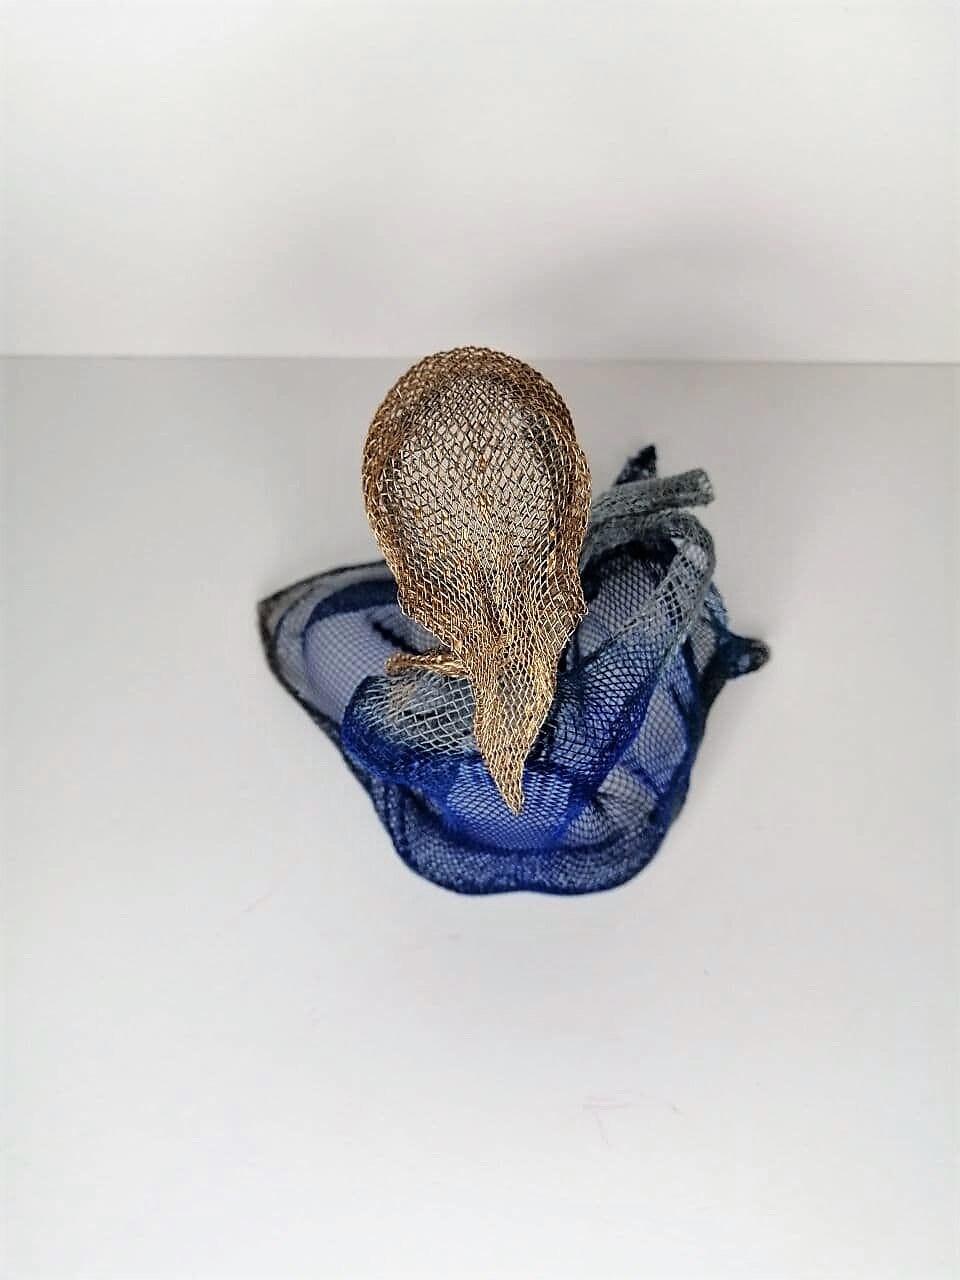 3D Metal-wire-mesh Sculpture of a Woman in Blue & Gold - Etsy